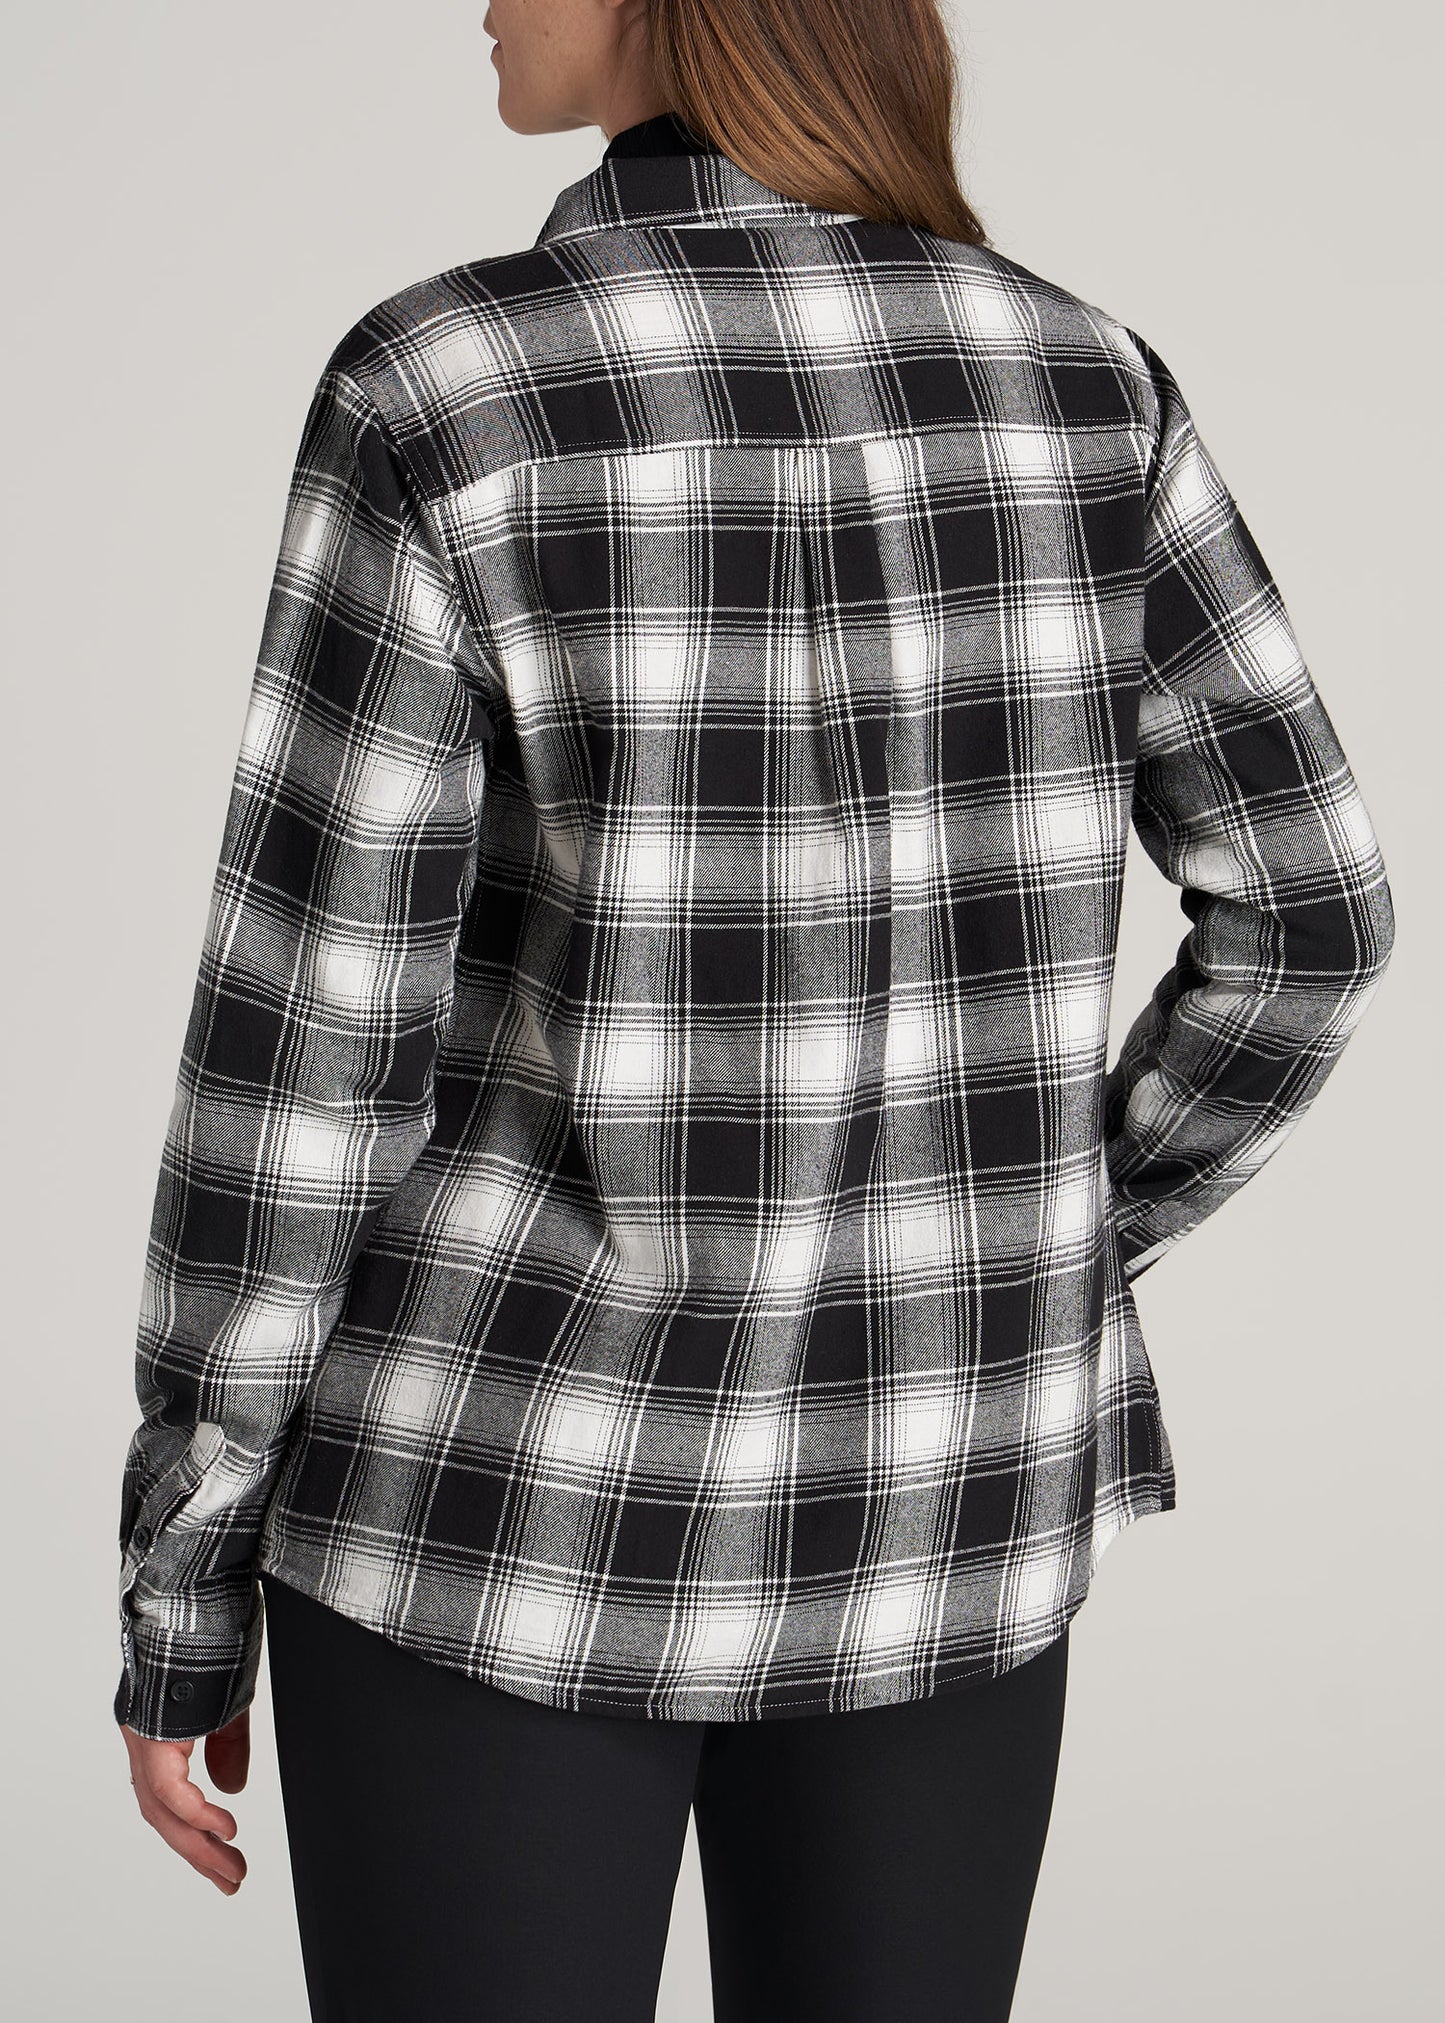 Flannel Button-Up Shirt for Tall Tall